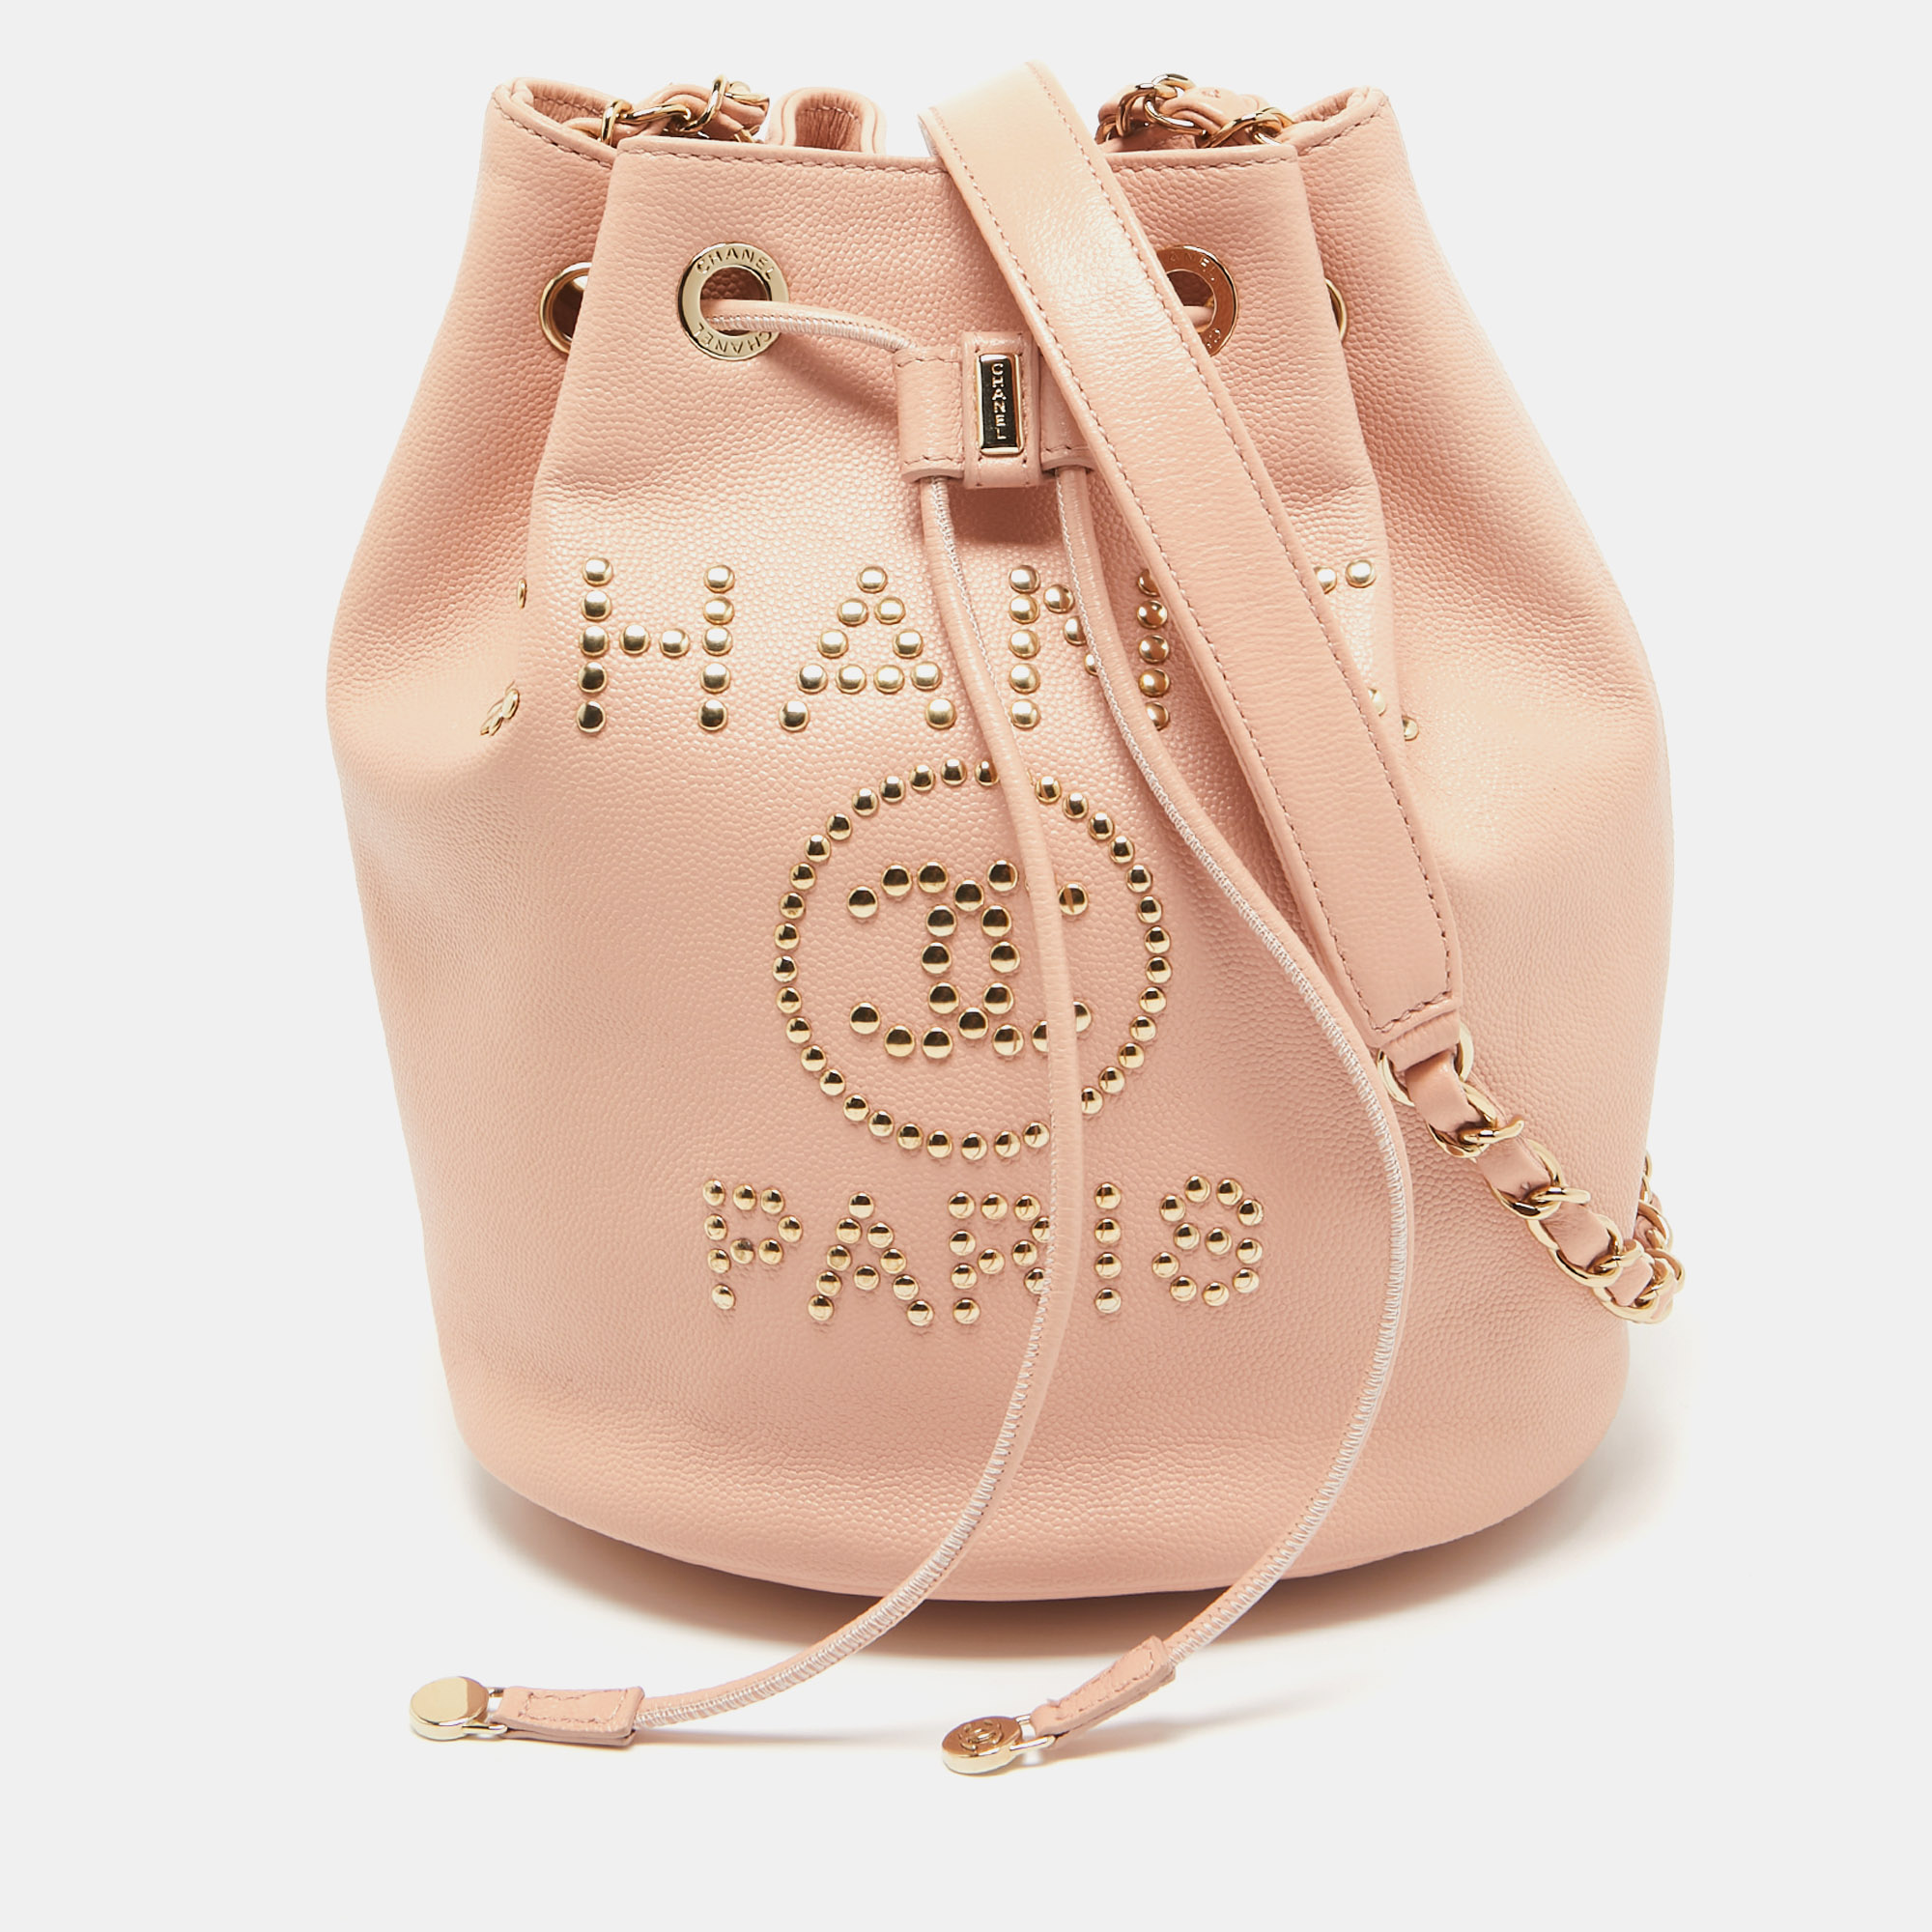 Chanel peach leather logo studs deauville drawstring bucket bag